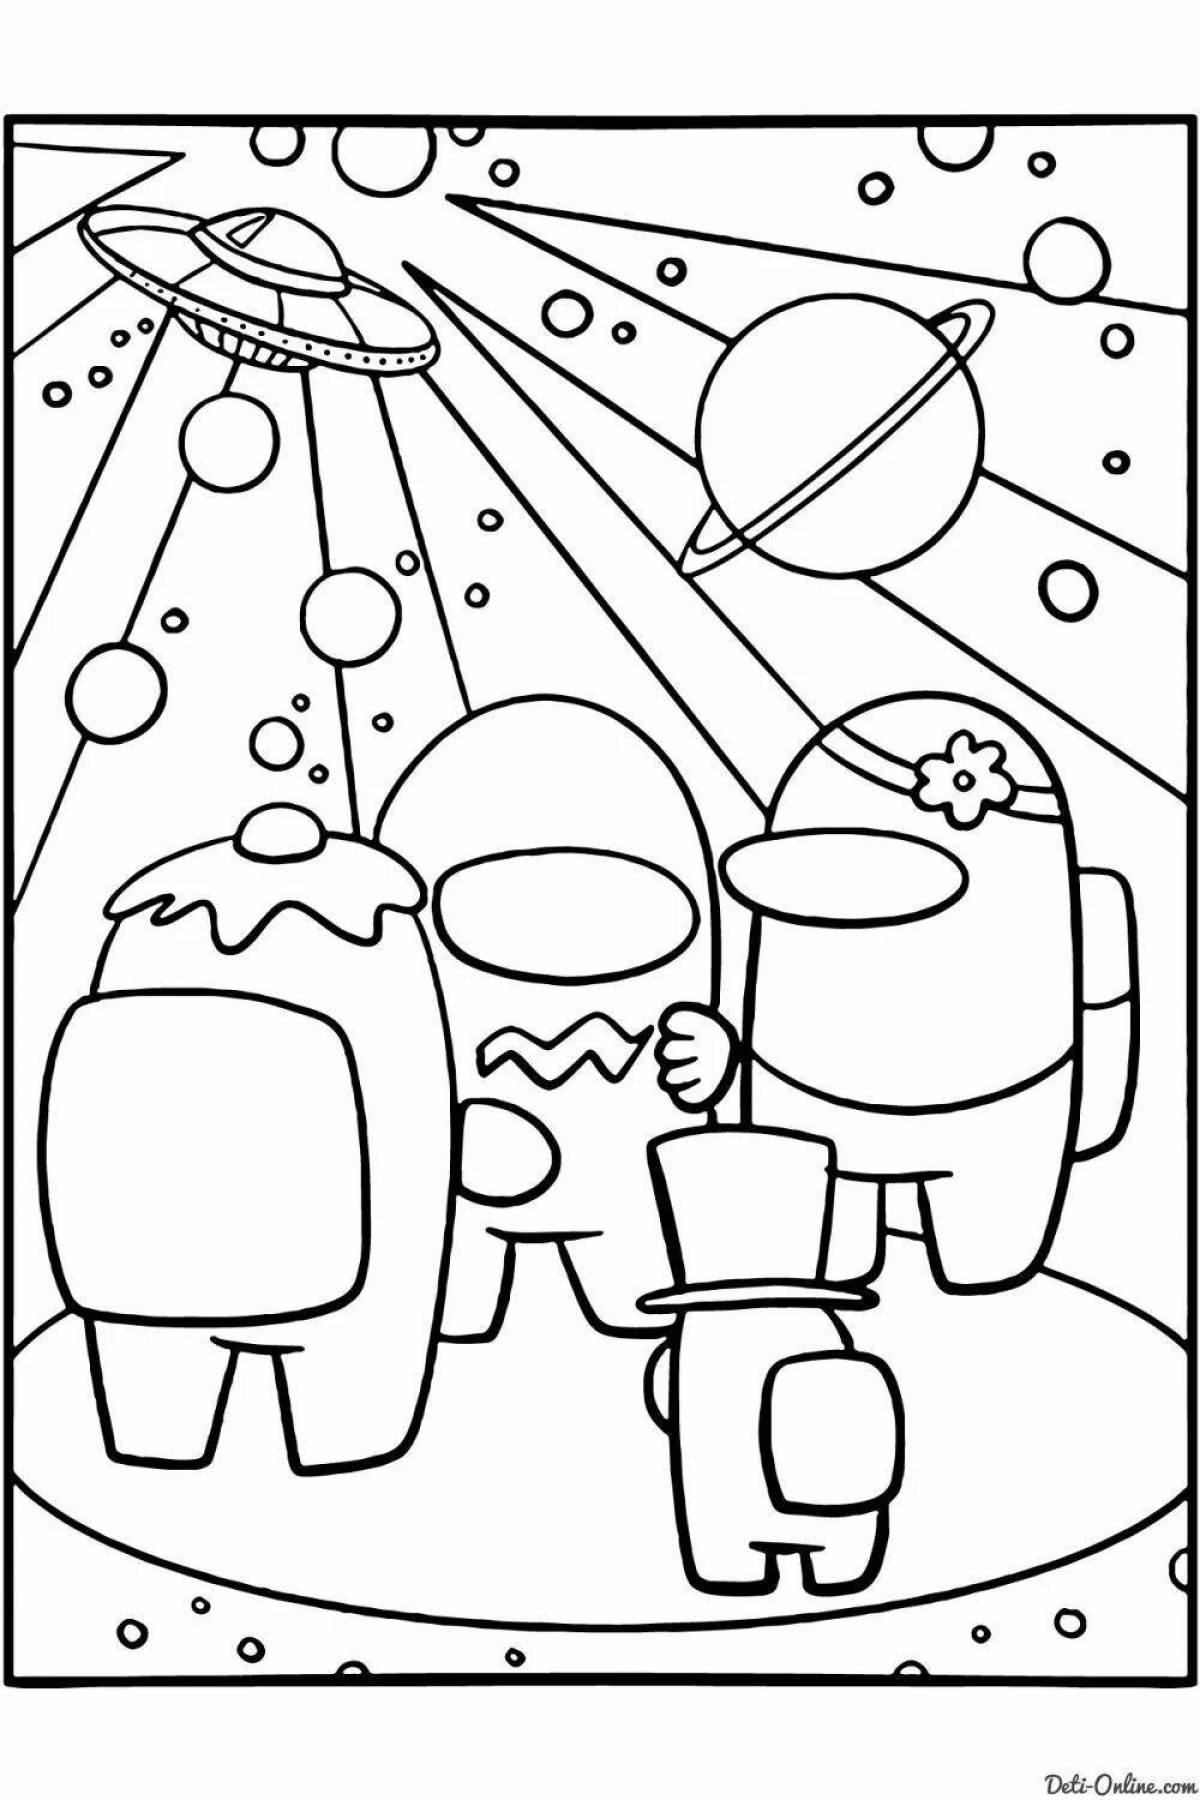 Gorgeous fnf among us coloring book